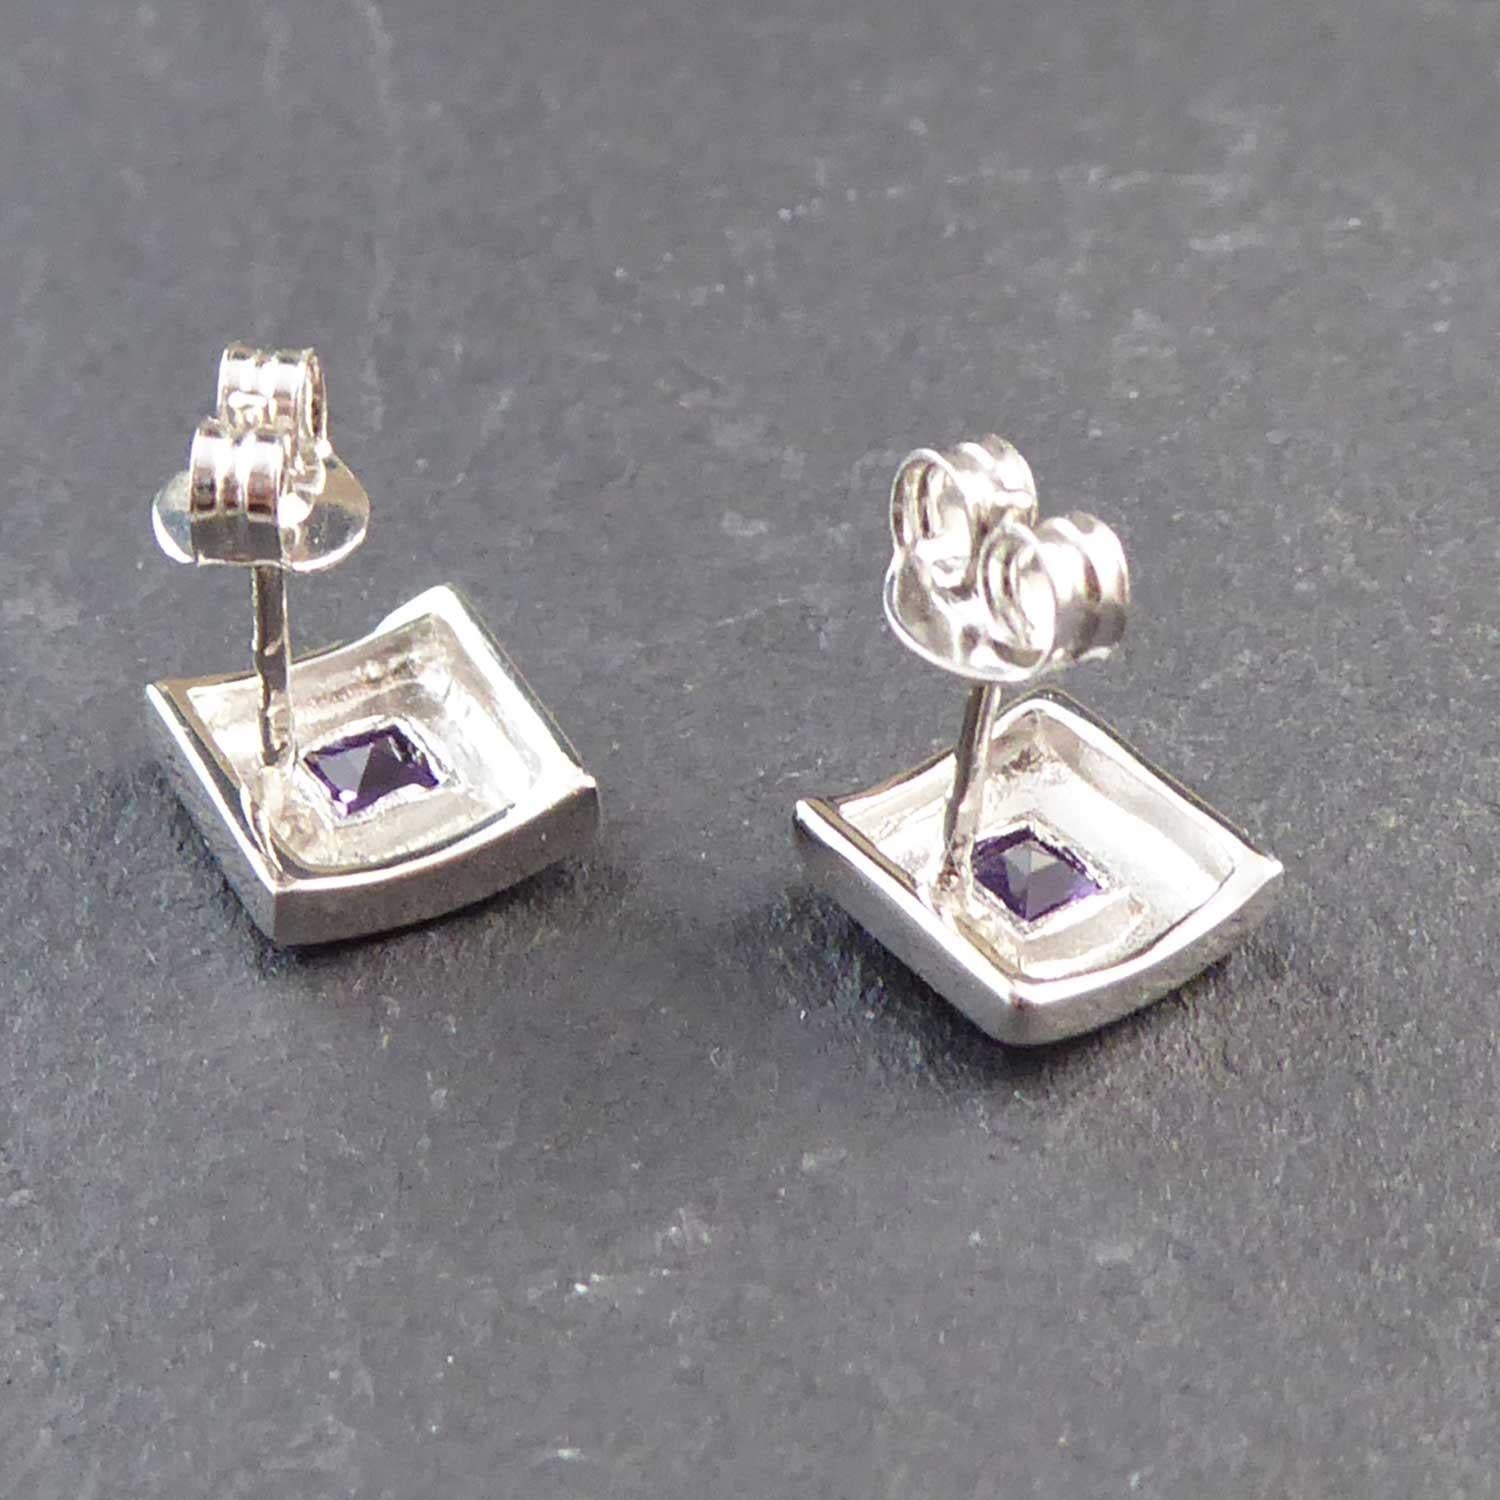 Contemporary Amethyst Stud Earrings, 18 Carat White Gold 3